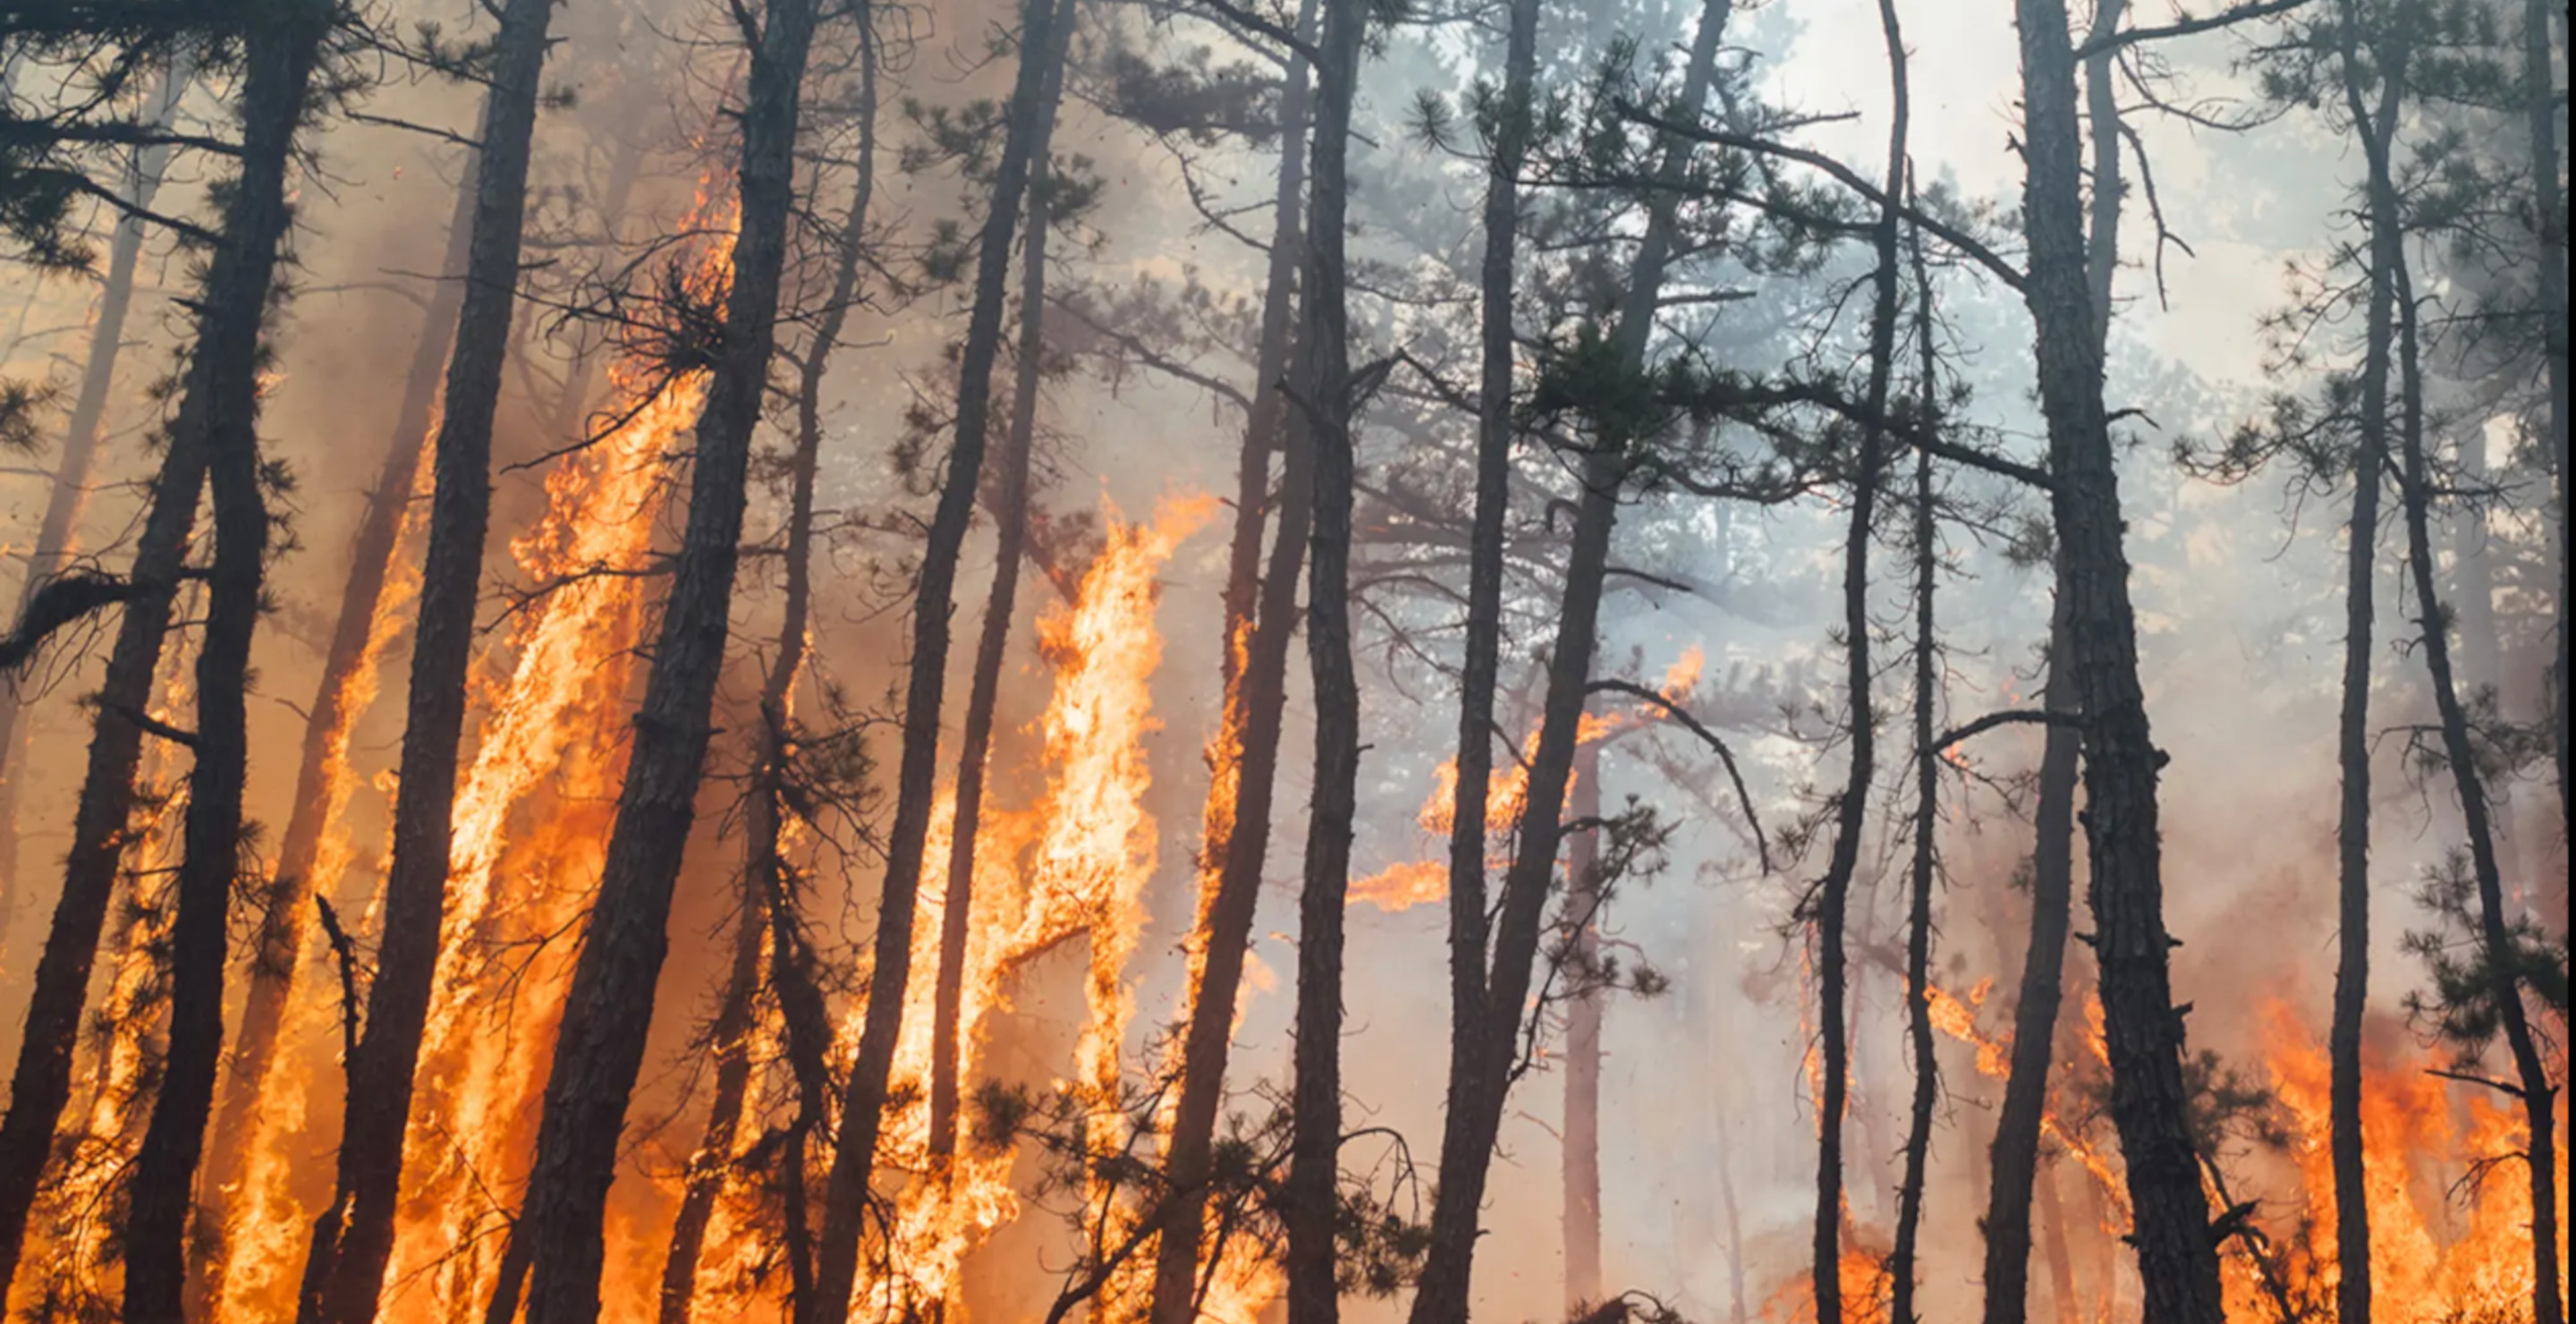 New Jersey Wildfire Burns Up Thousands Of Acres Thanks To 4th Of July Firework